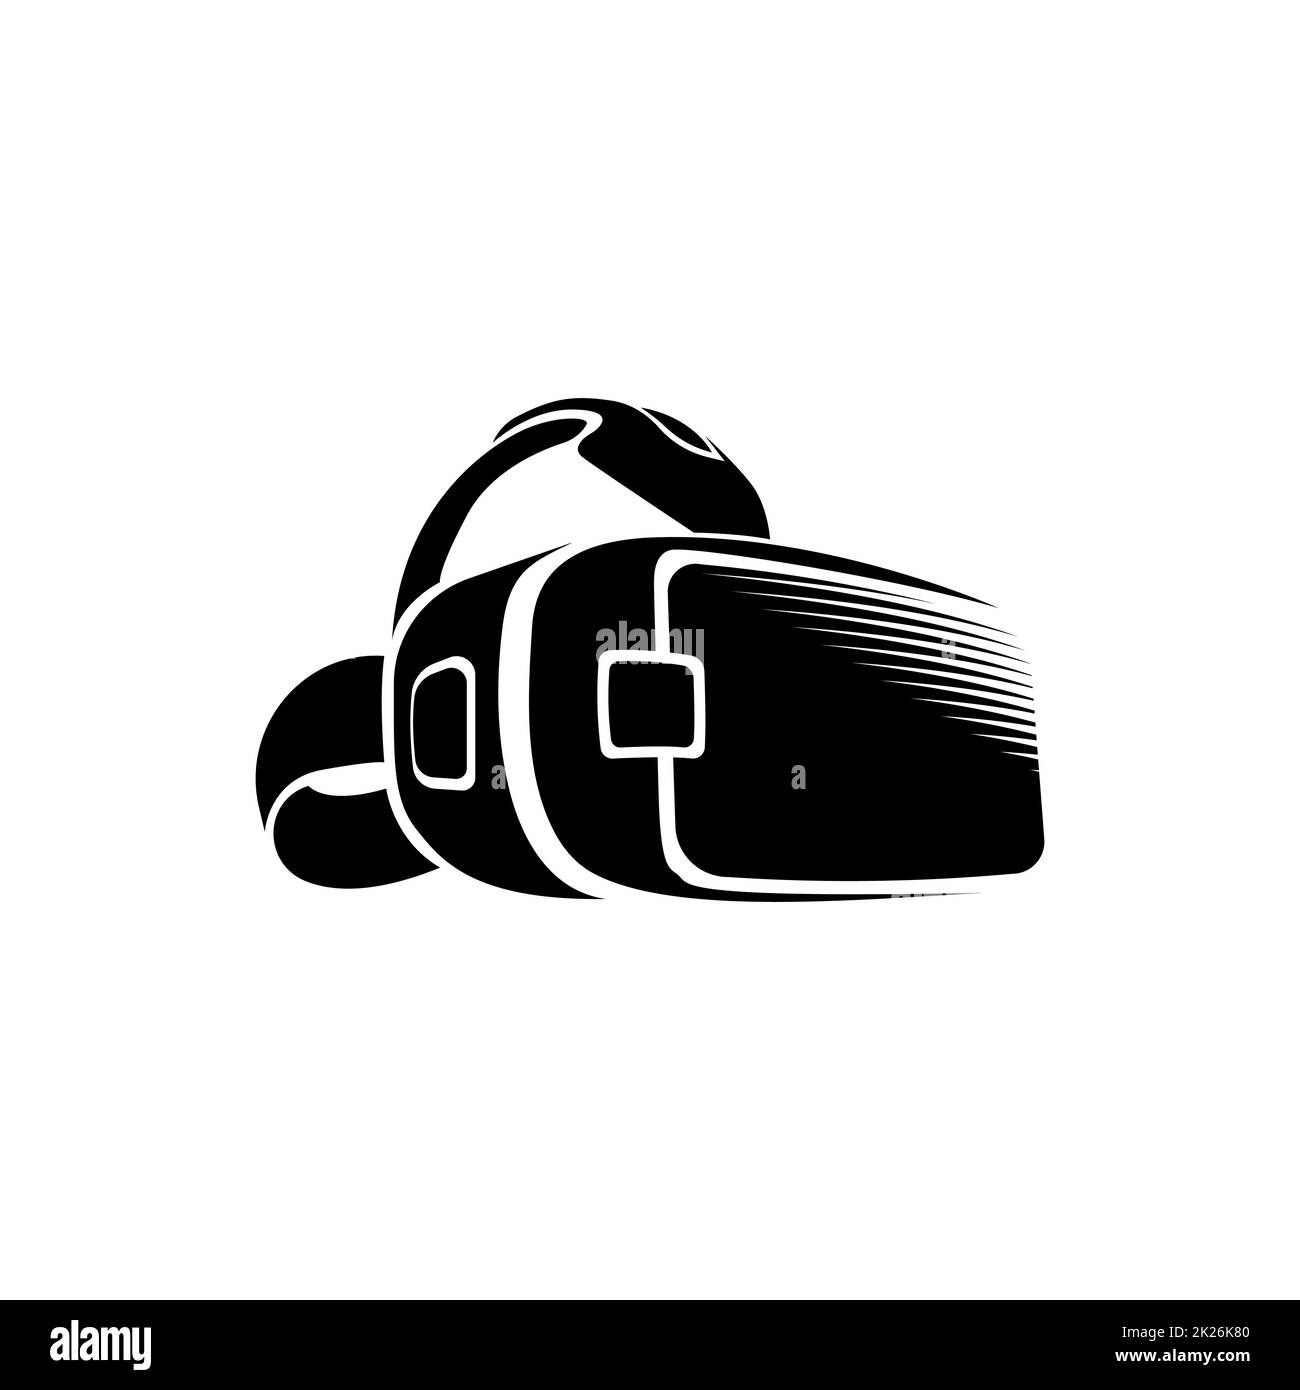 Isolated vr headset logotype on white background. Black color virtual reality helmet logo. Head-mounted display icon. Modern gaming device. Simulation smartglasses vector illustration . Stock Photo